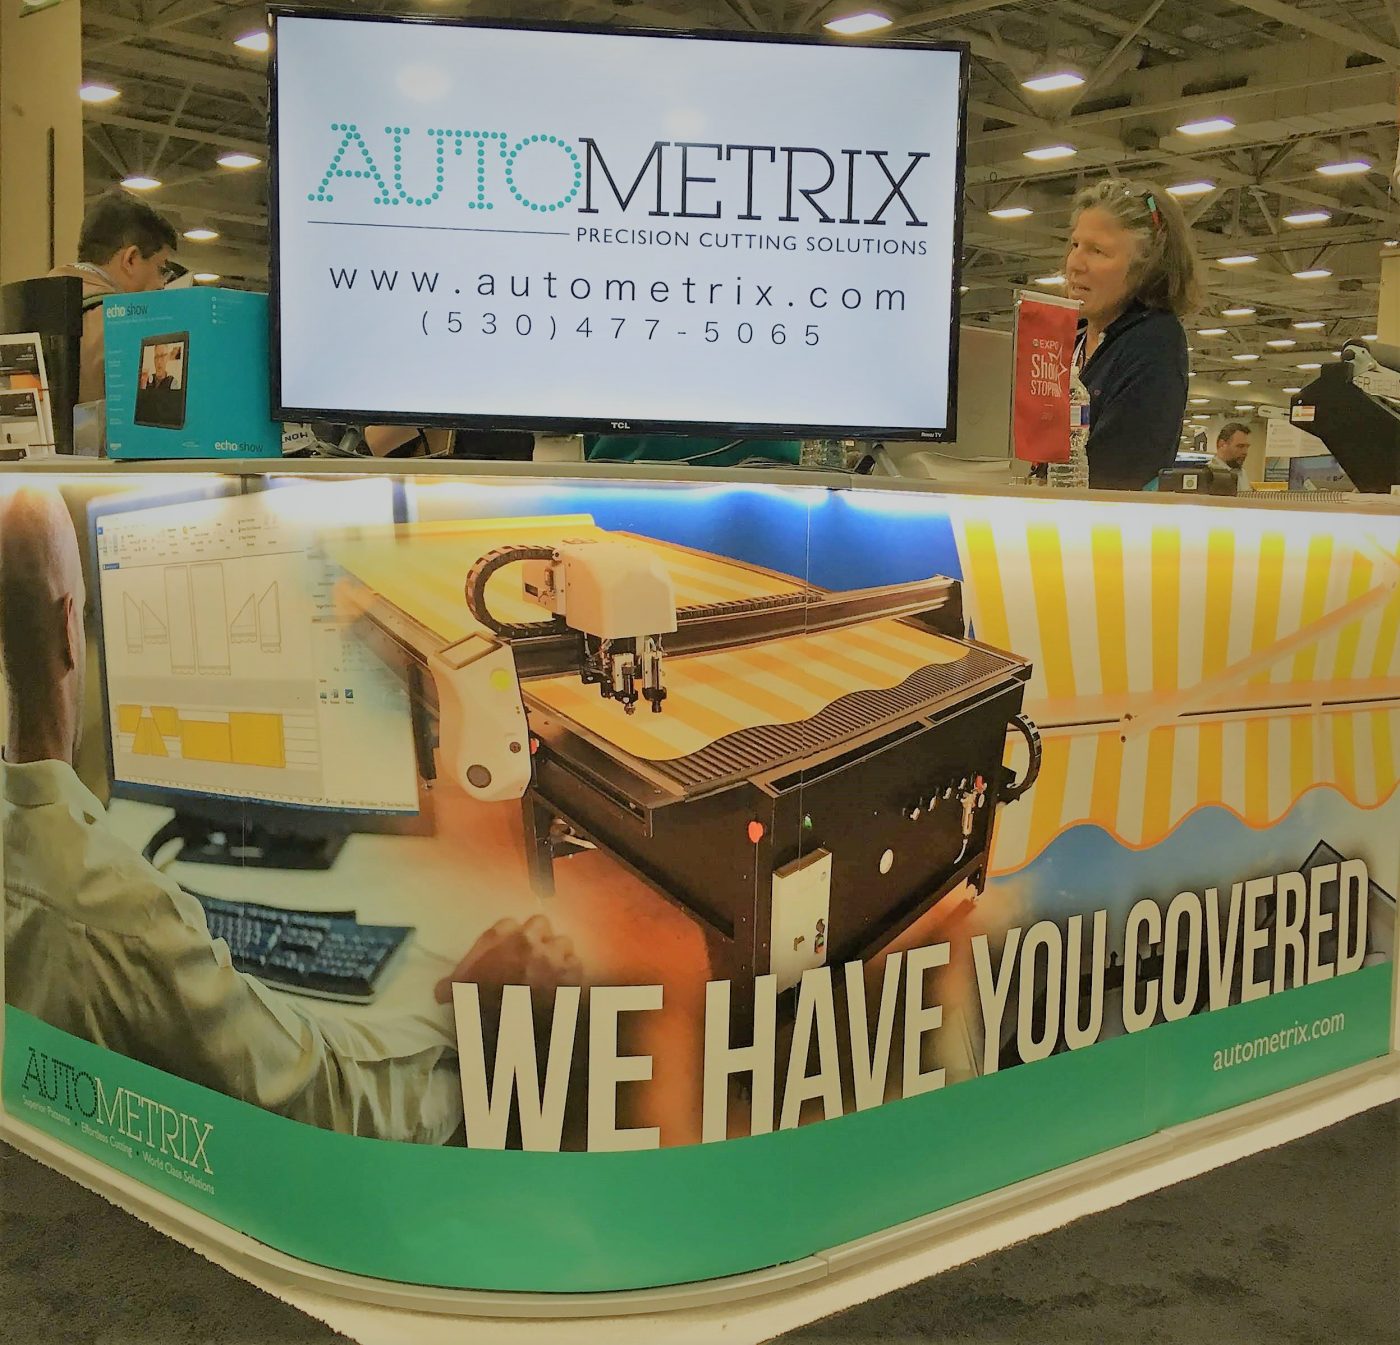 Autometrix Booth at Industrial fabric Trade Shows